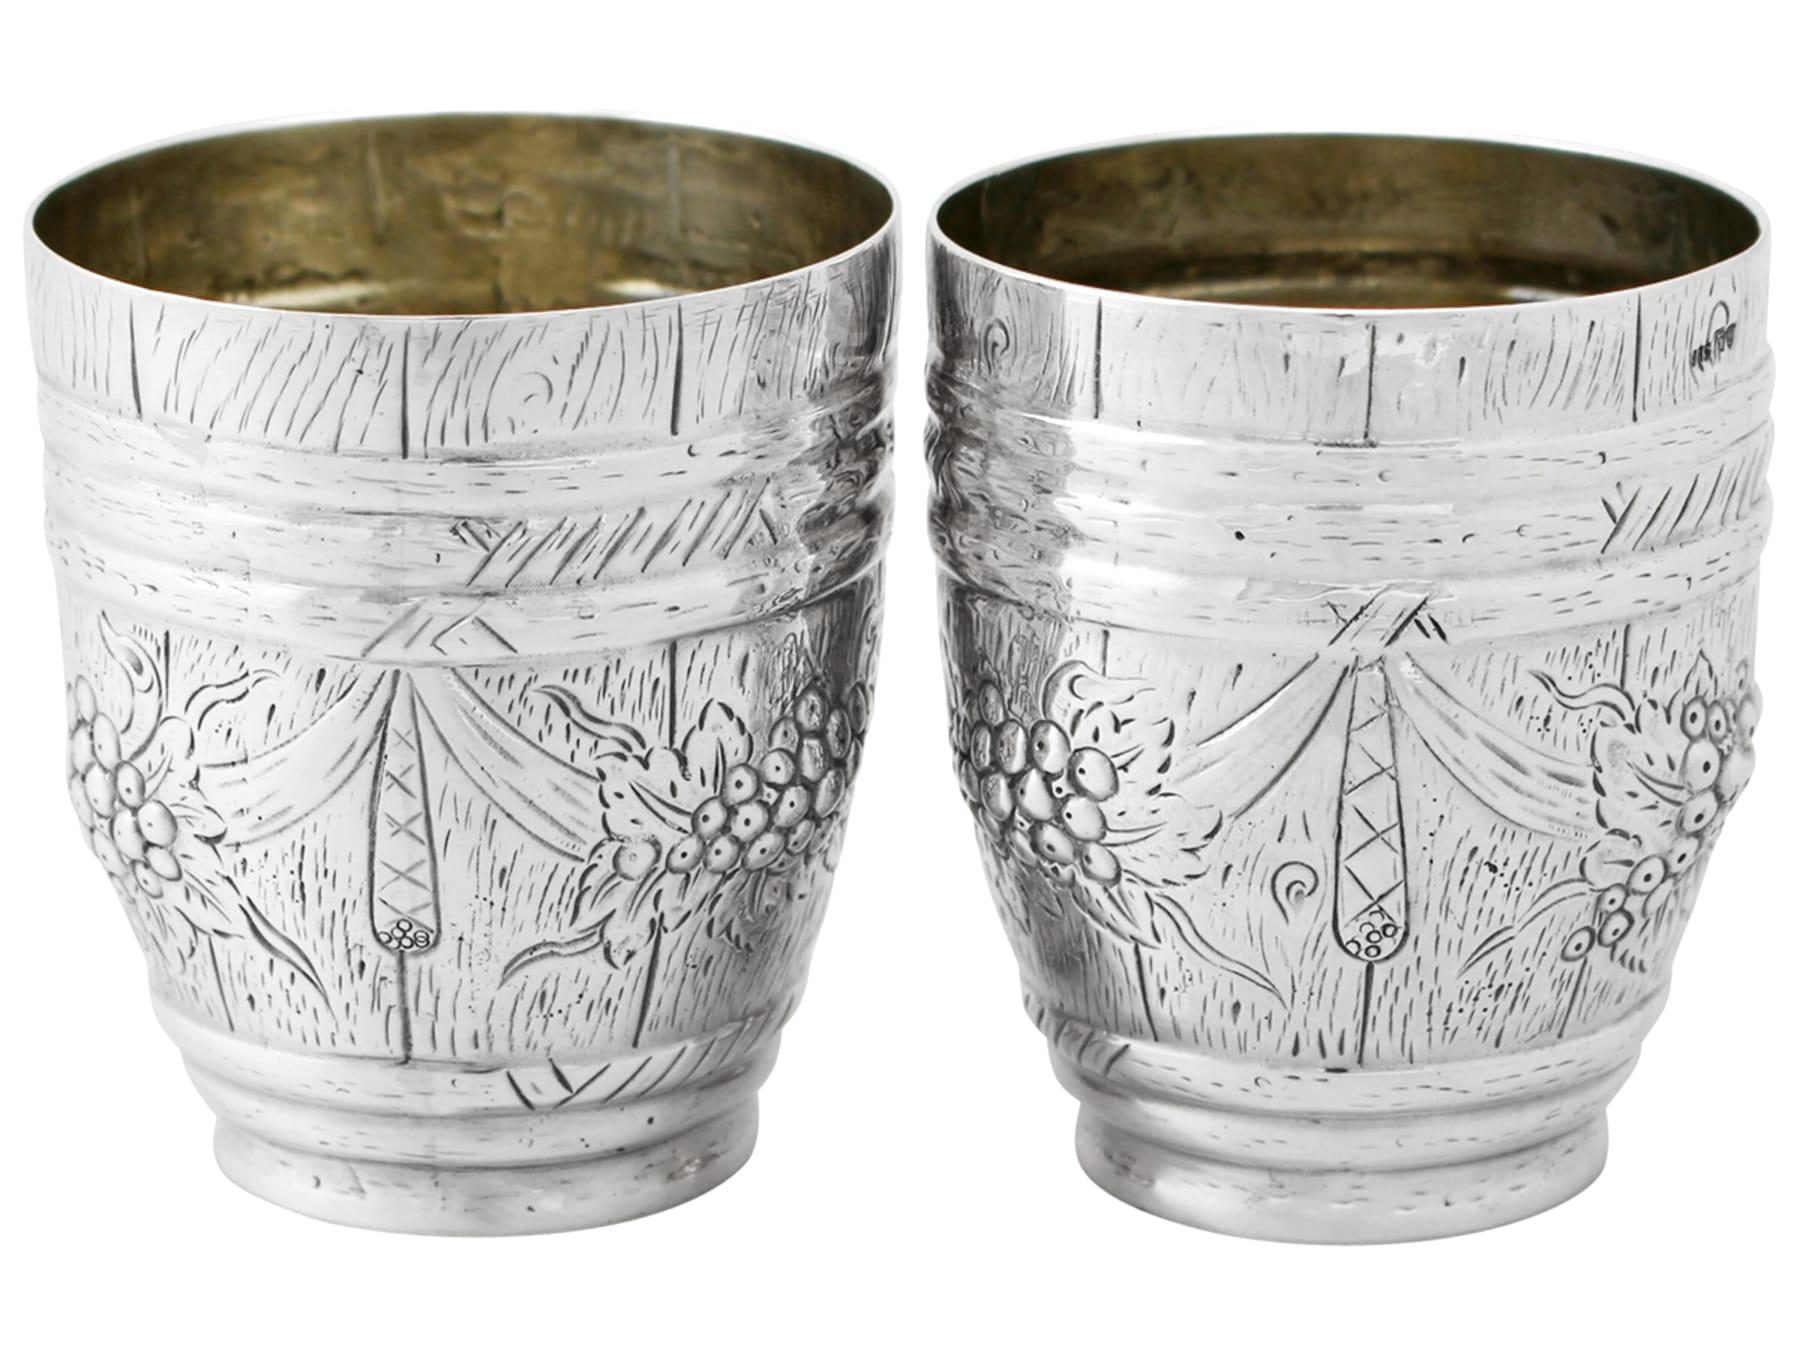 A fine pair of antique German silver beakers; an addition to our continental antique silverware collection.

These fine antique German silver beakers have been realistically modelled in the form of a barrel.

The circular rounded surface of each